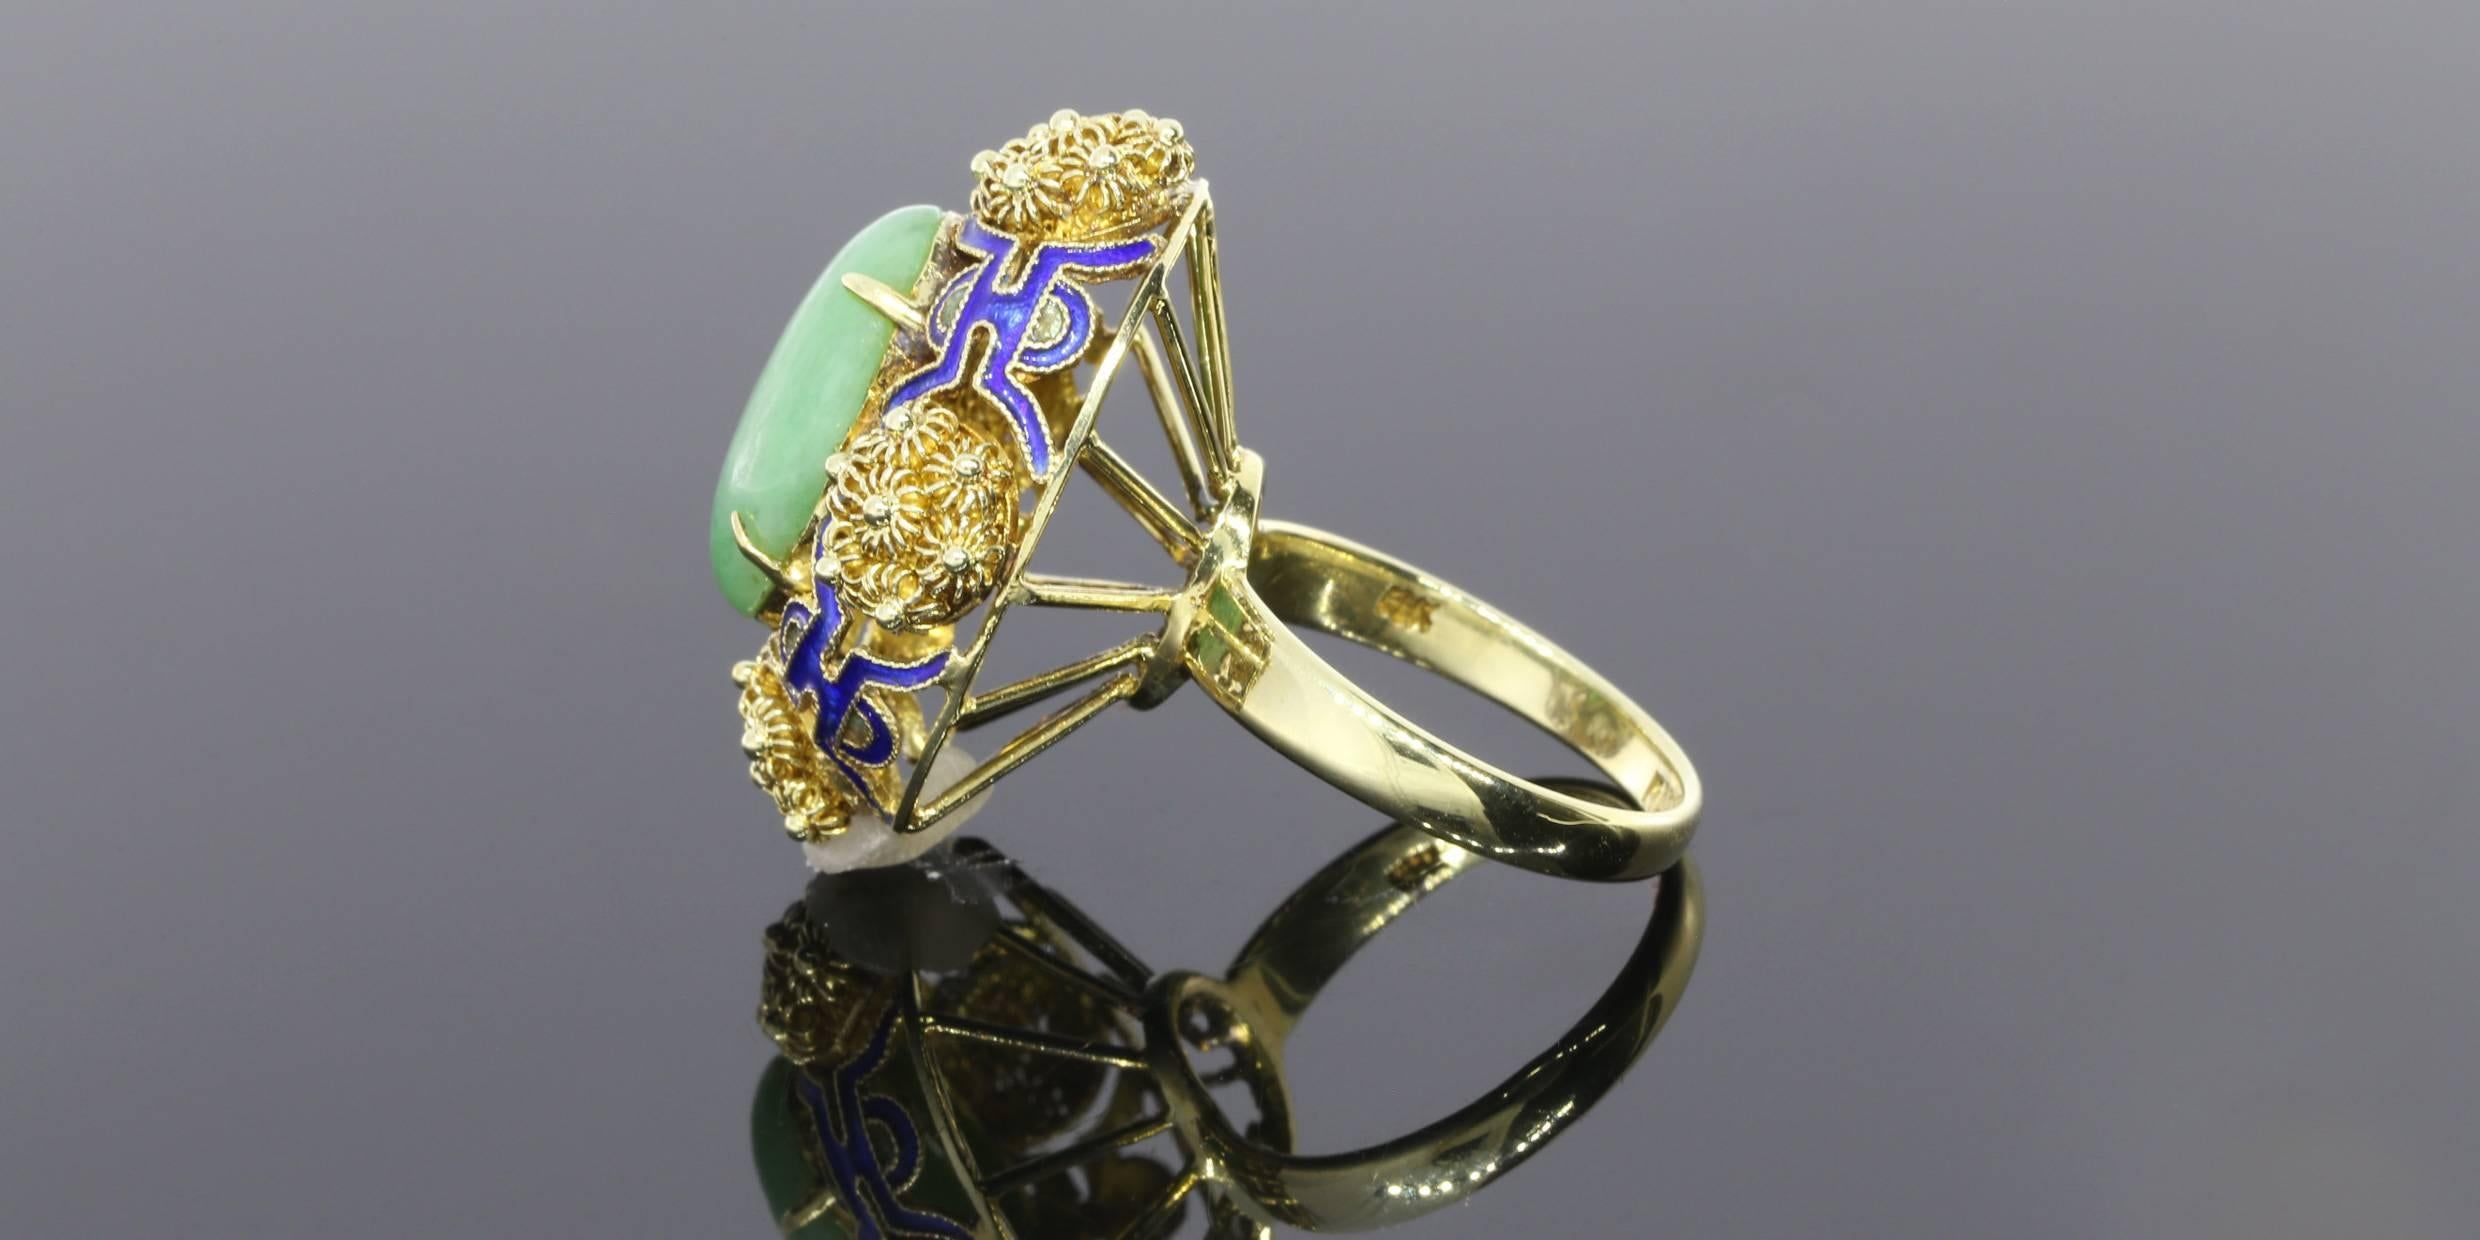 This is a beautiful, vintage jade and blue enamel flower ring. The ring features one jade oval cabochon stone measuring approximately 15 millimeters by 9 millimeters (.59 inches by .35 inches). This jade is a lovely medium green color, not too dark